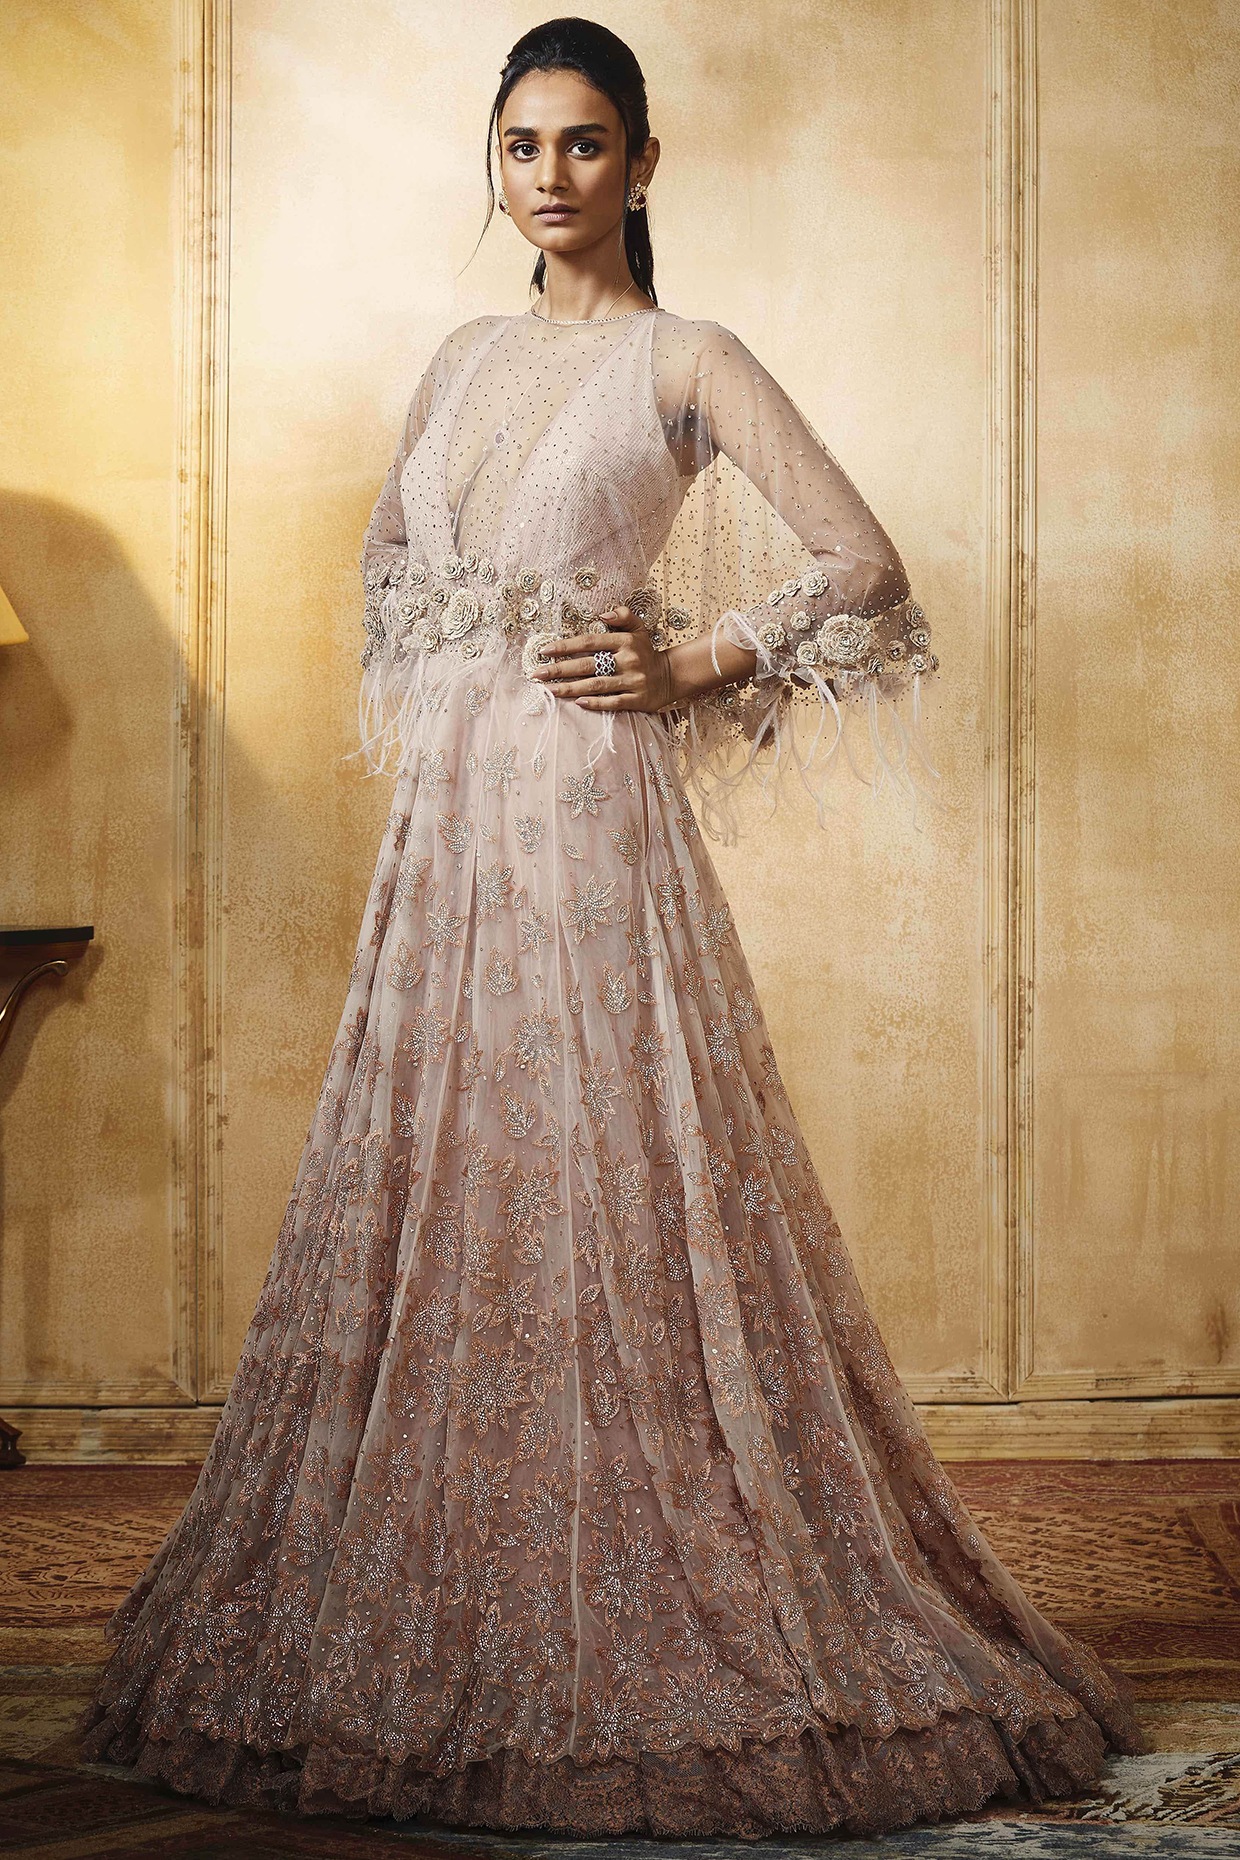 Latest Collection of Tarun Tahiliani #PiecesOfYou Has Dropped & We Have Our  Hearts Beating Hard! | Embroidered gown, Indian bridal fashion, Tarun  tahiliani